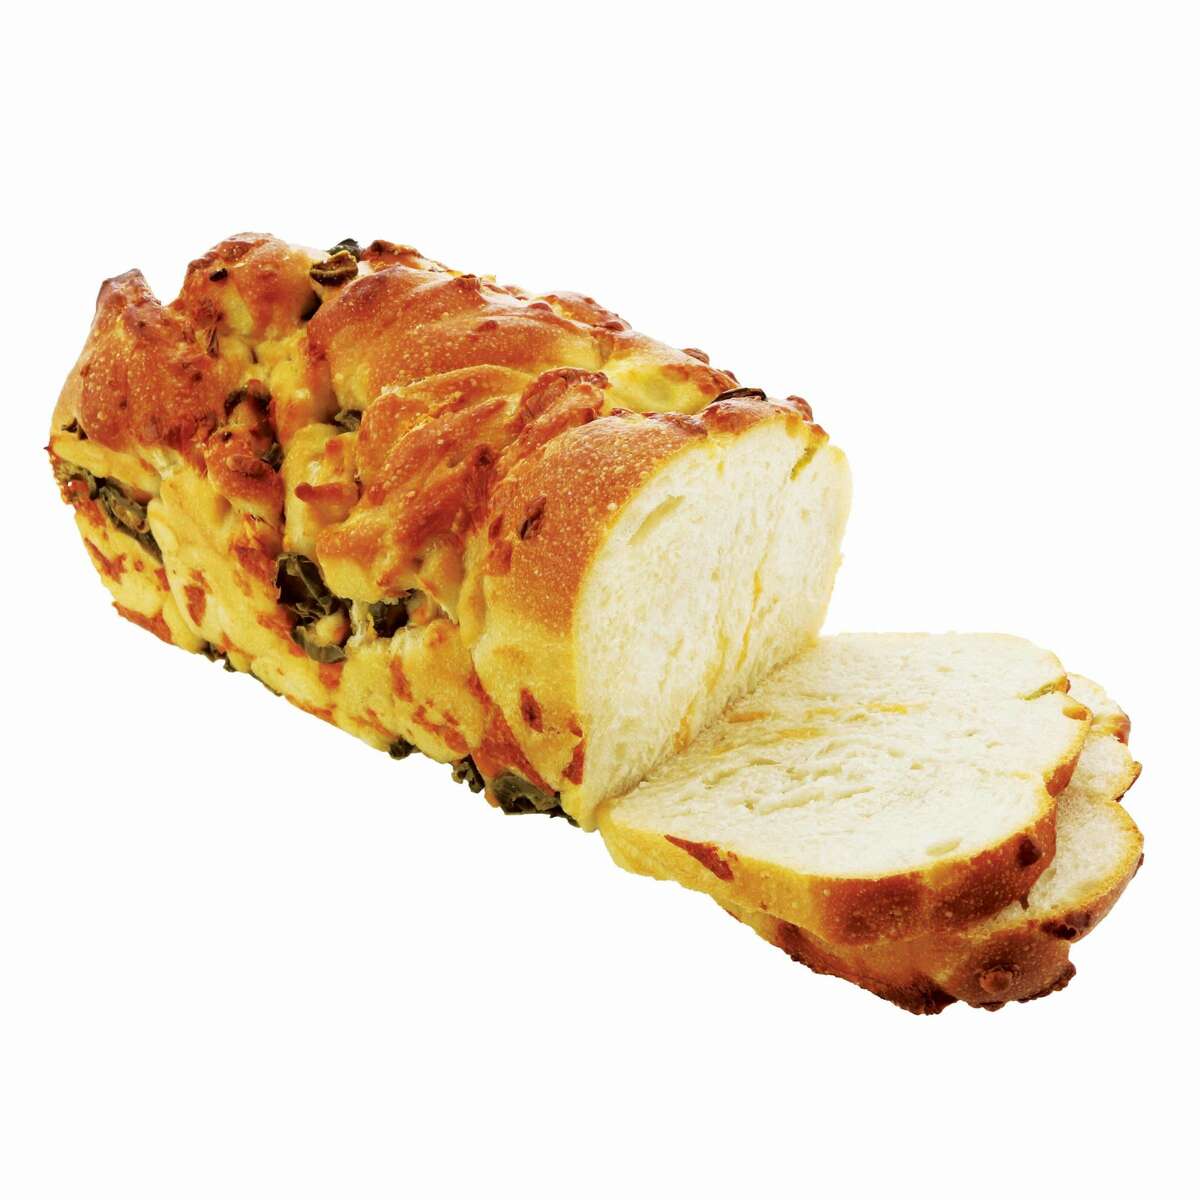 H-E-B Jalapeno Cheese Bread: "jalapeño cheese bread ugh i love it, the blueberry streusel muffins are delicious too," affectionate-secret said.